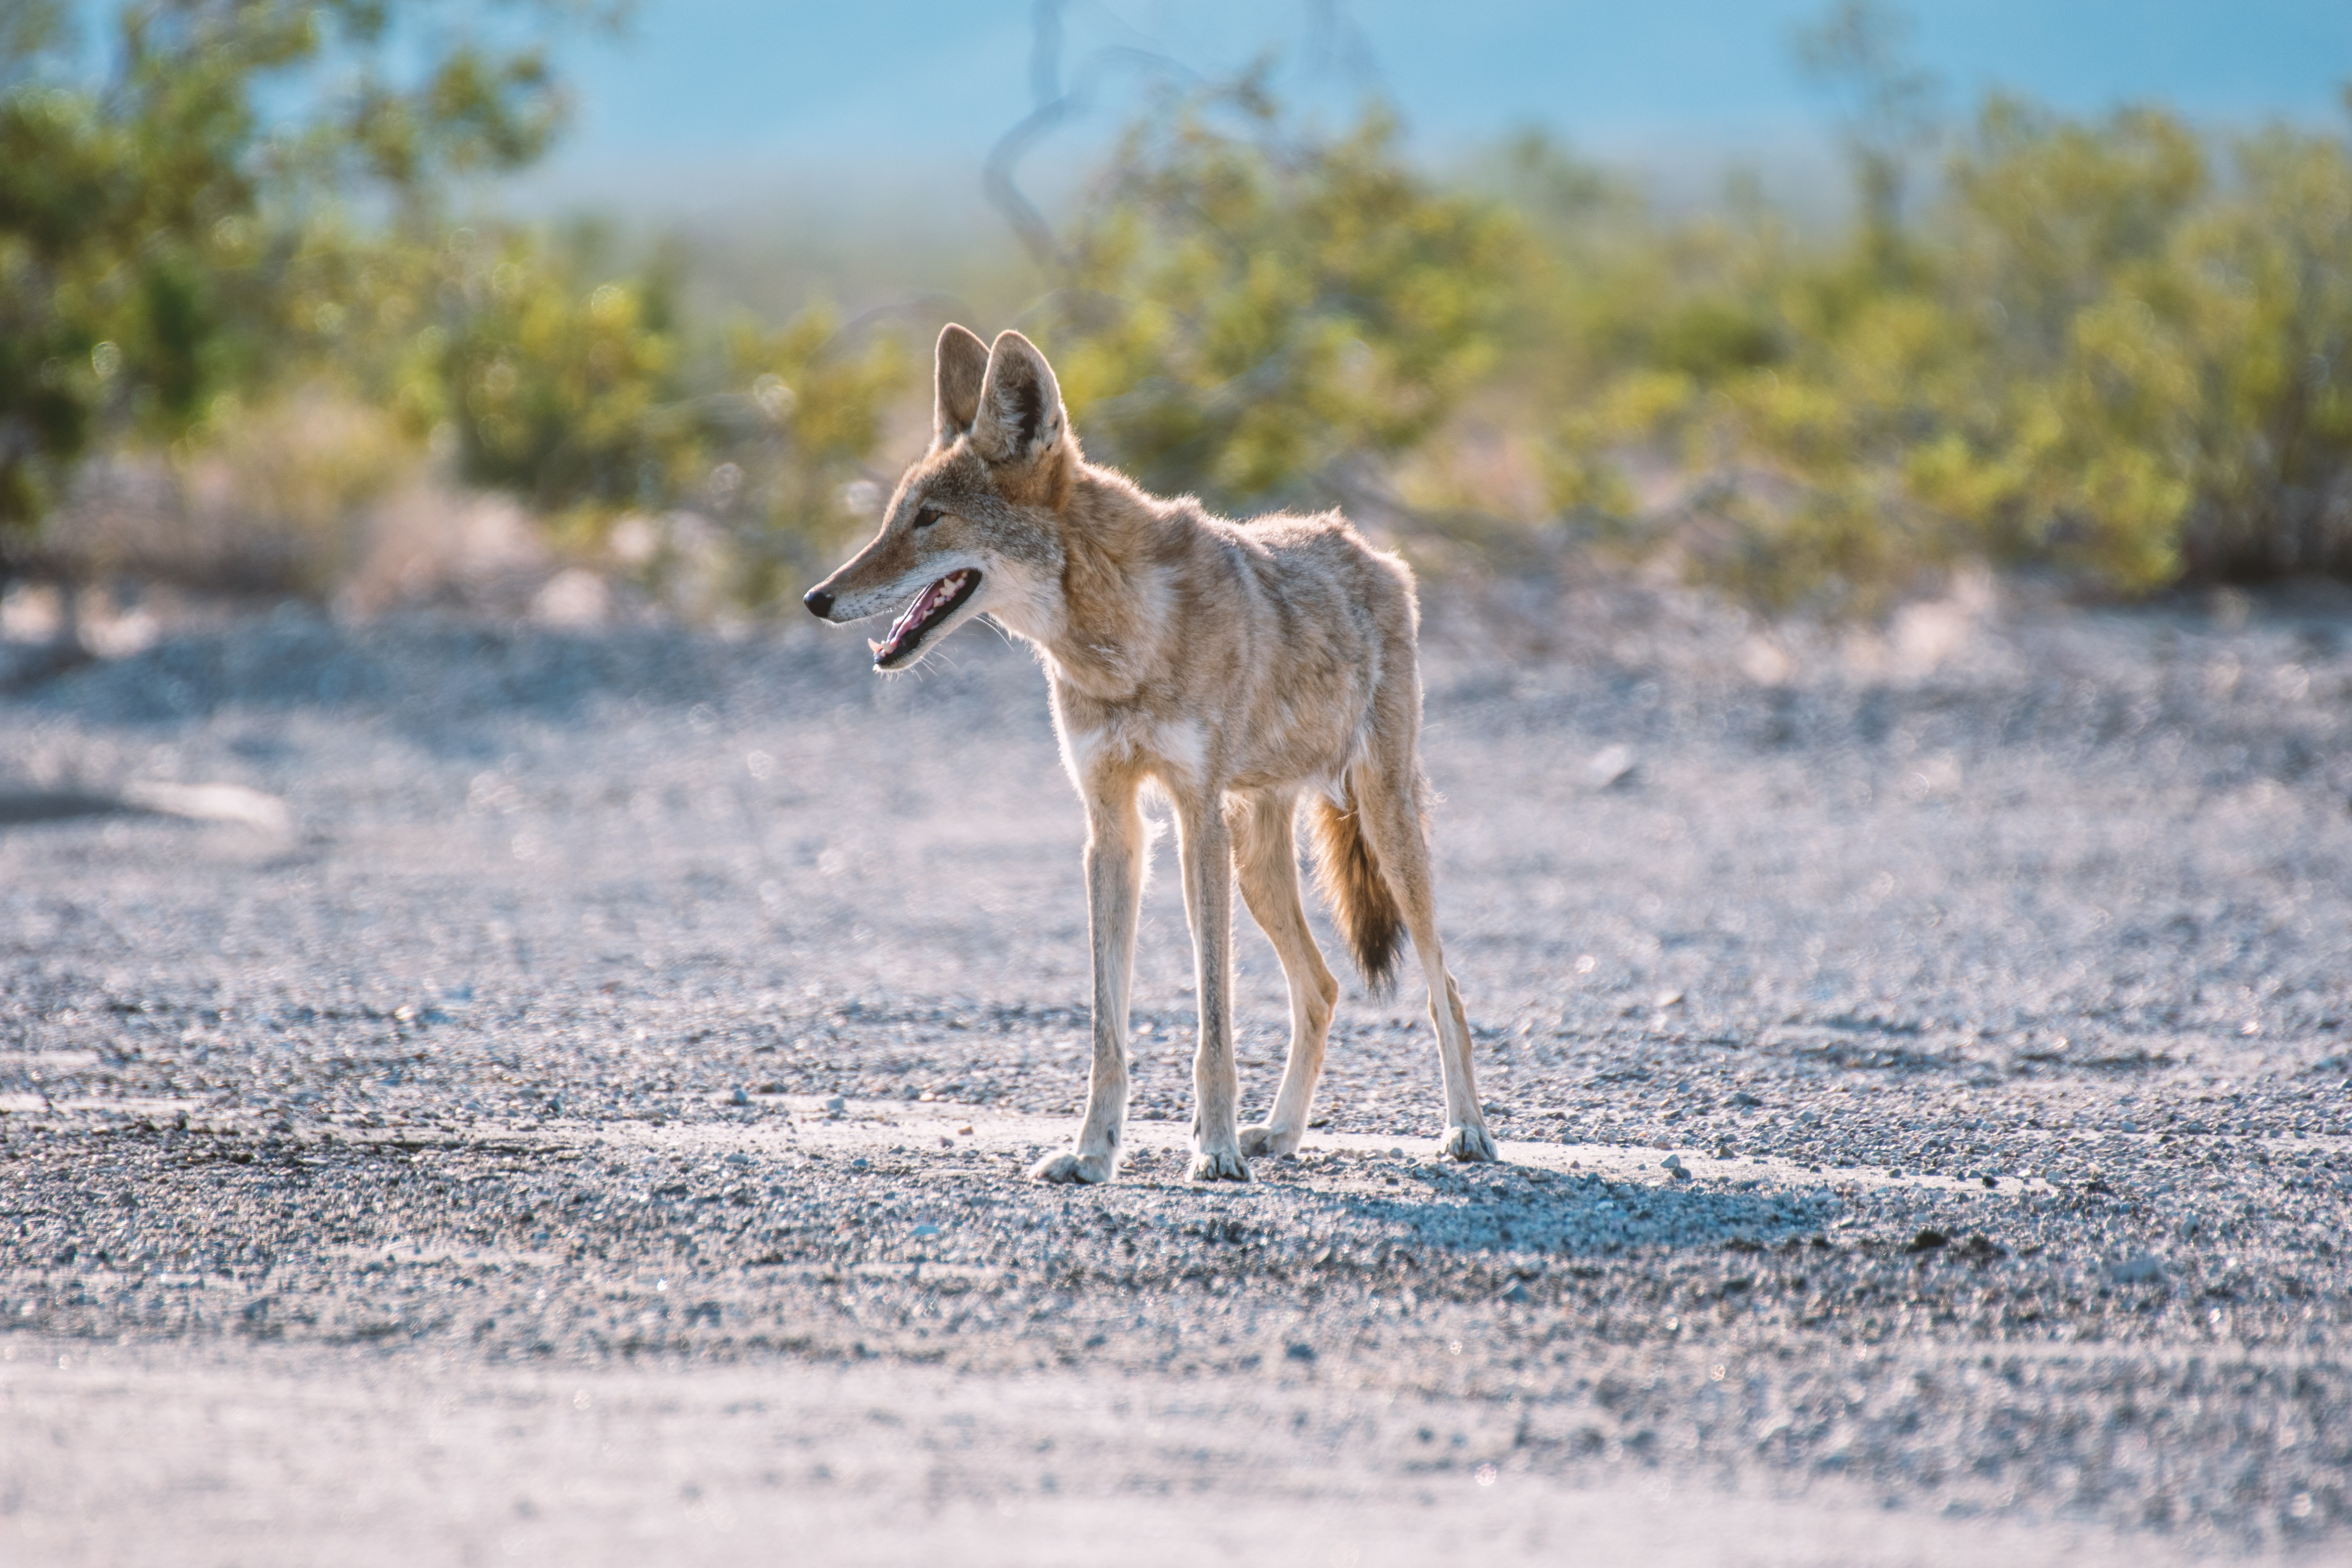 Coyotes roaming PHX community worries residents